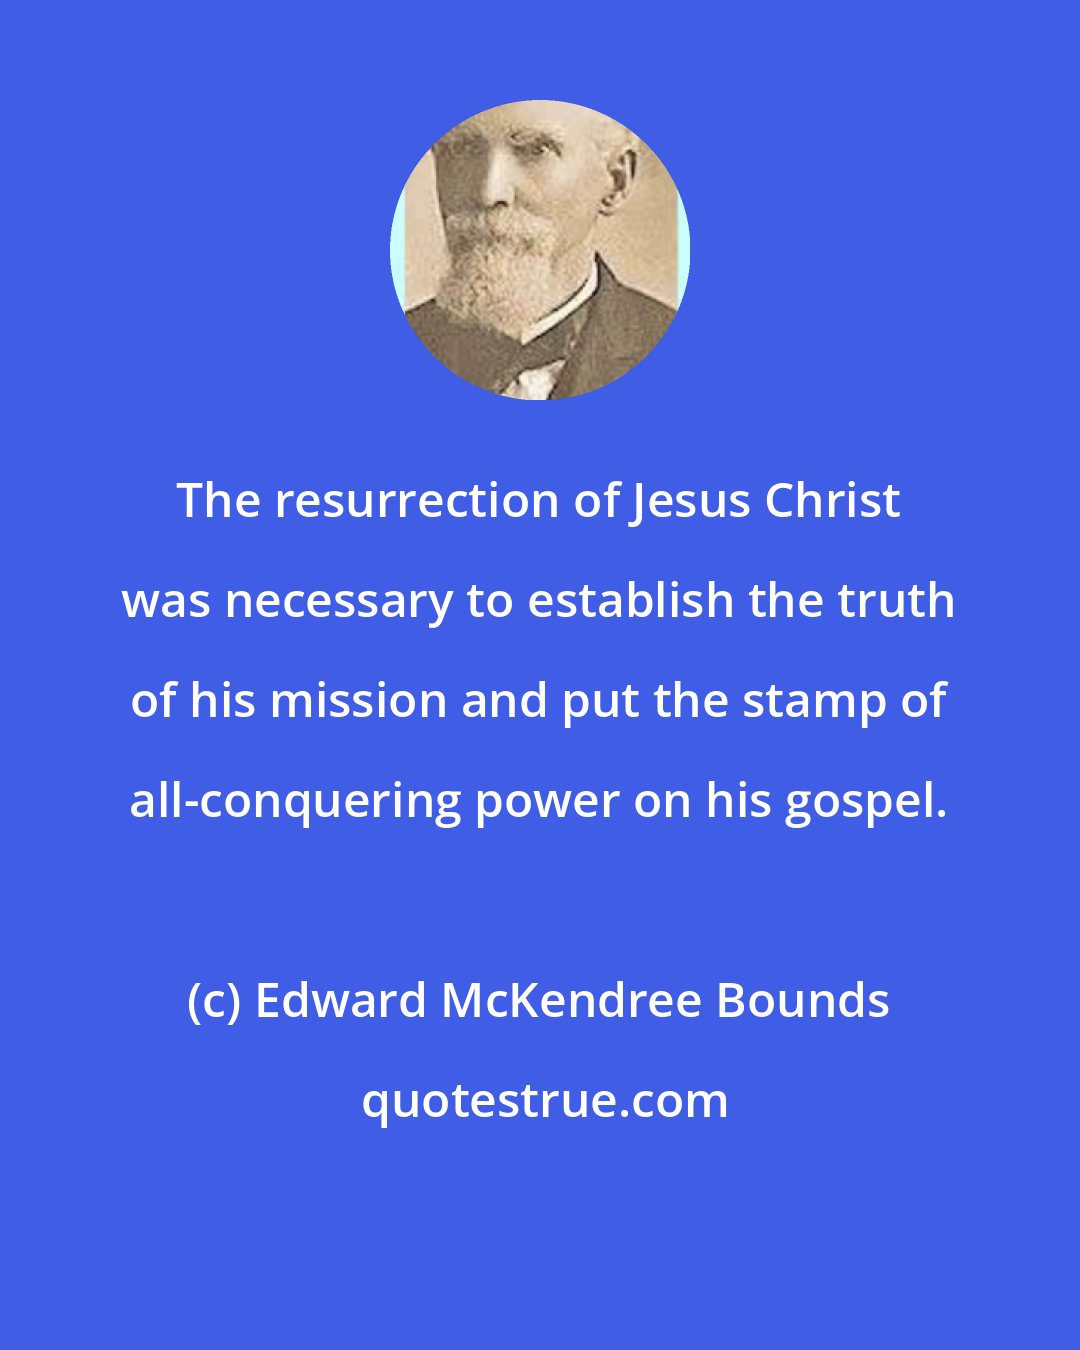 Edward McKendree Bounds: The resurrection of Jesus Christ was necessary to establish the truth of his mission and put the stamp of all-conquering power on his gospel.